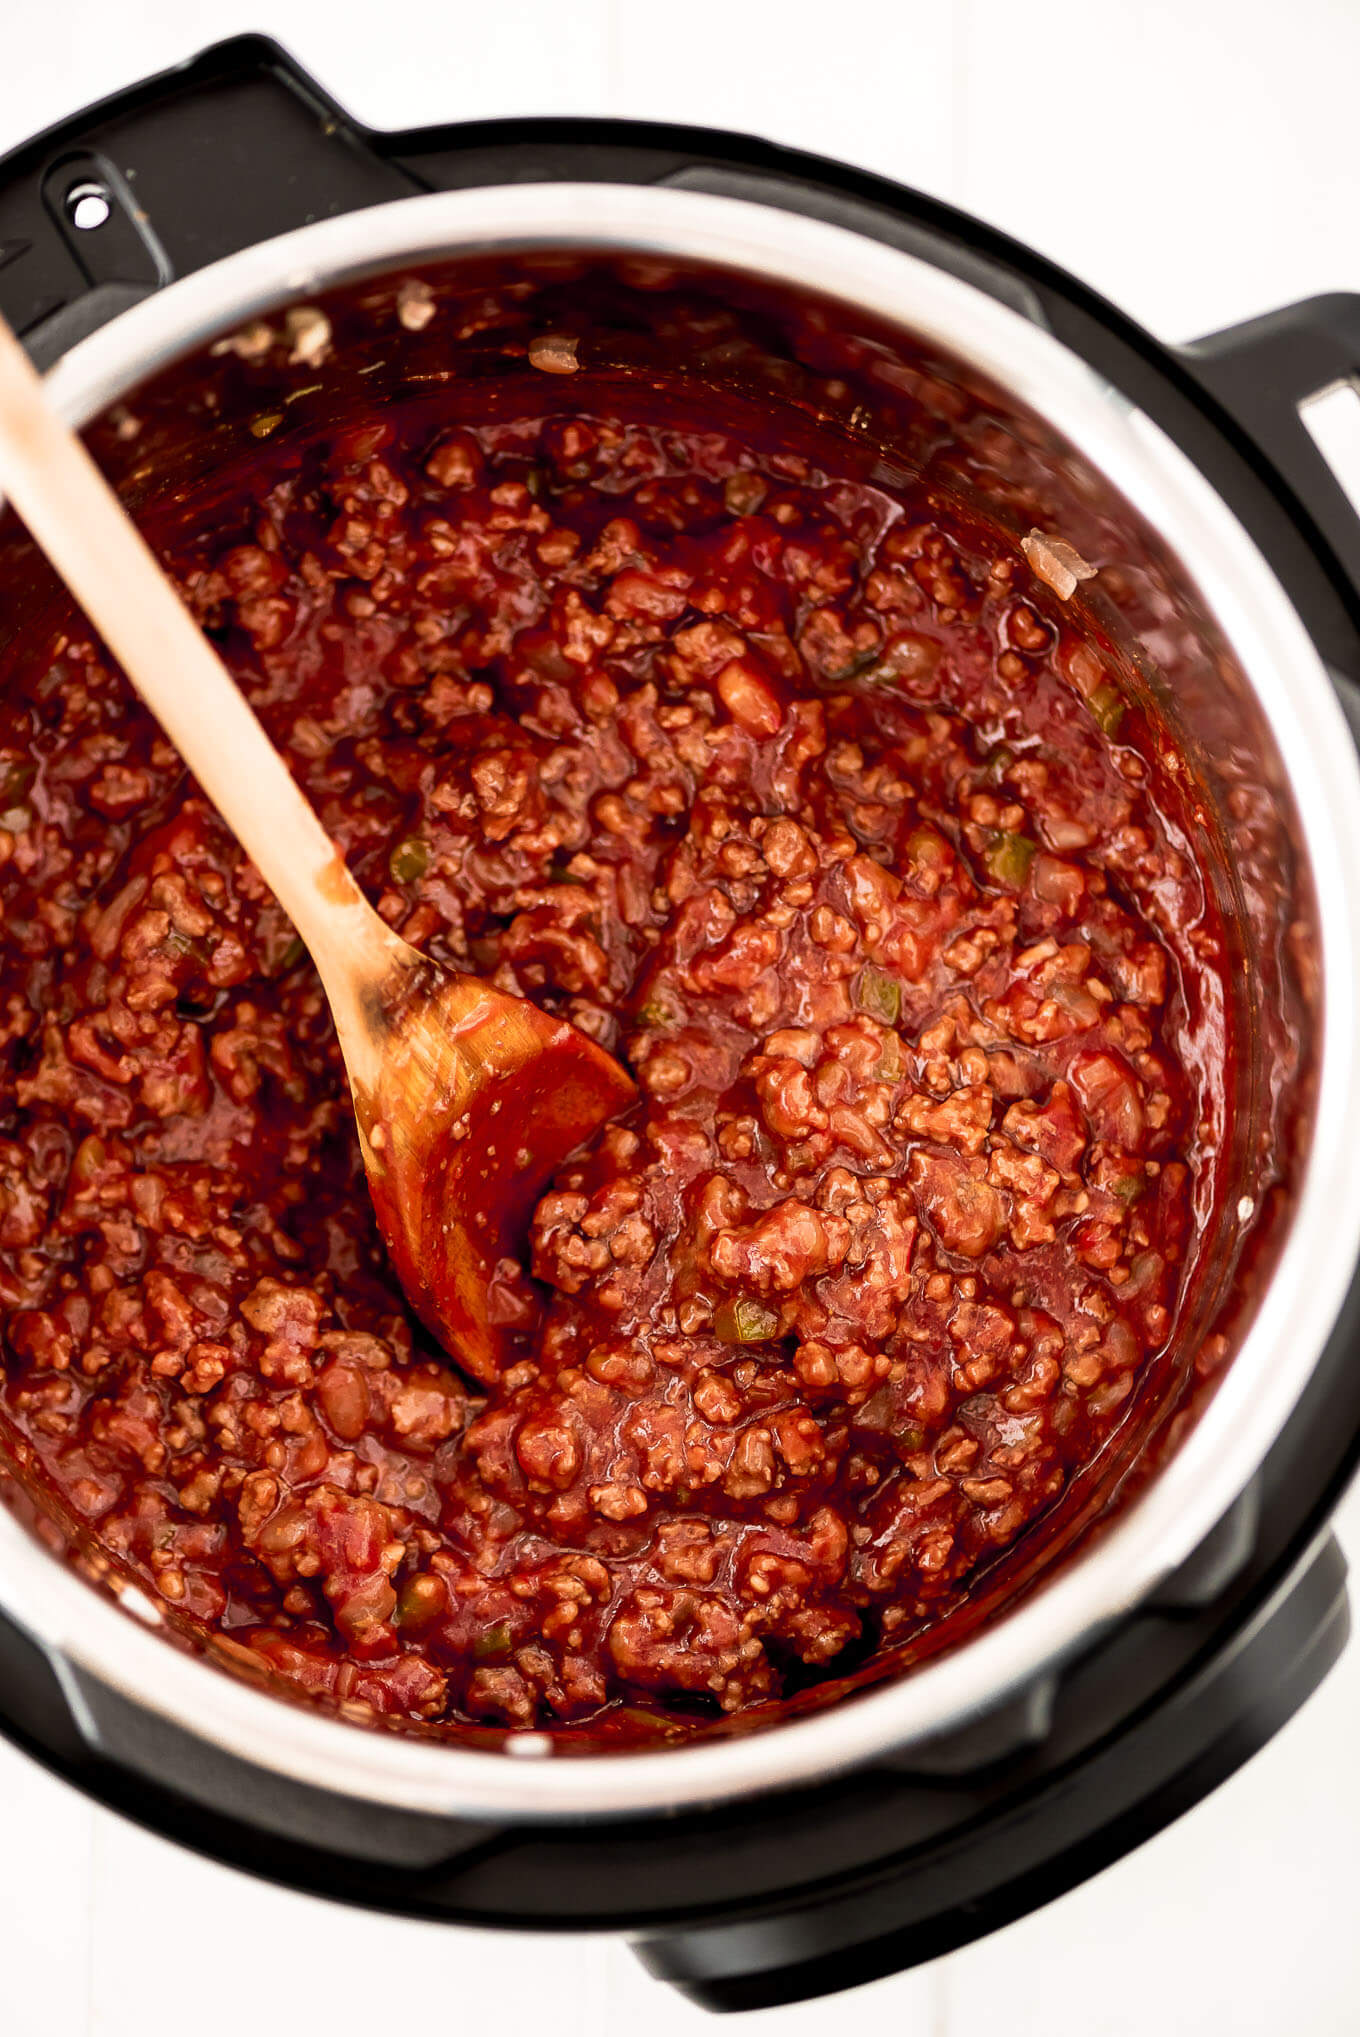 Sloppy Joes meat sauce in a Instant Pot pressure cooker.